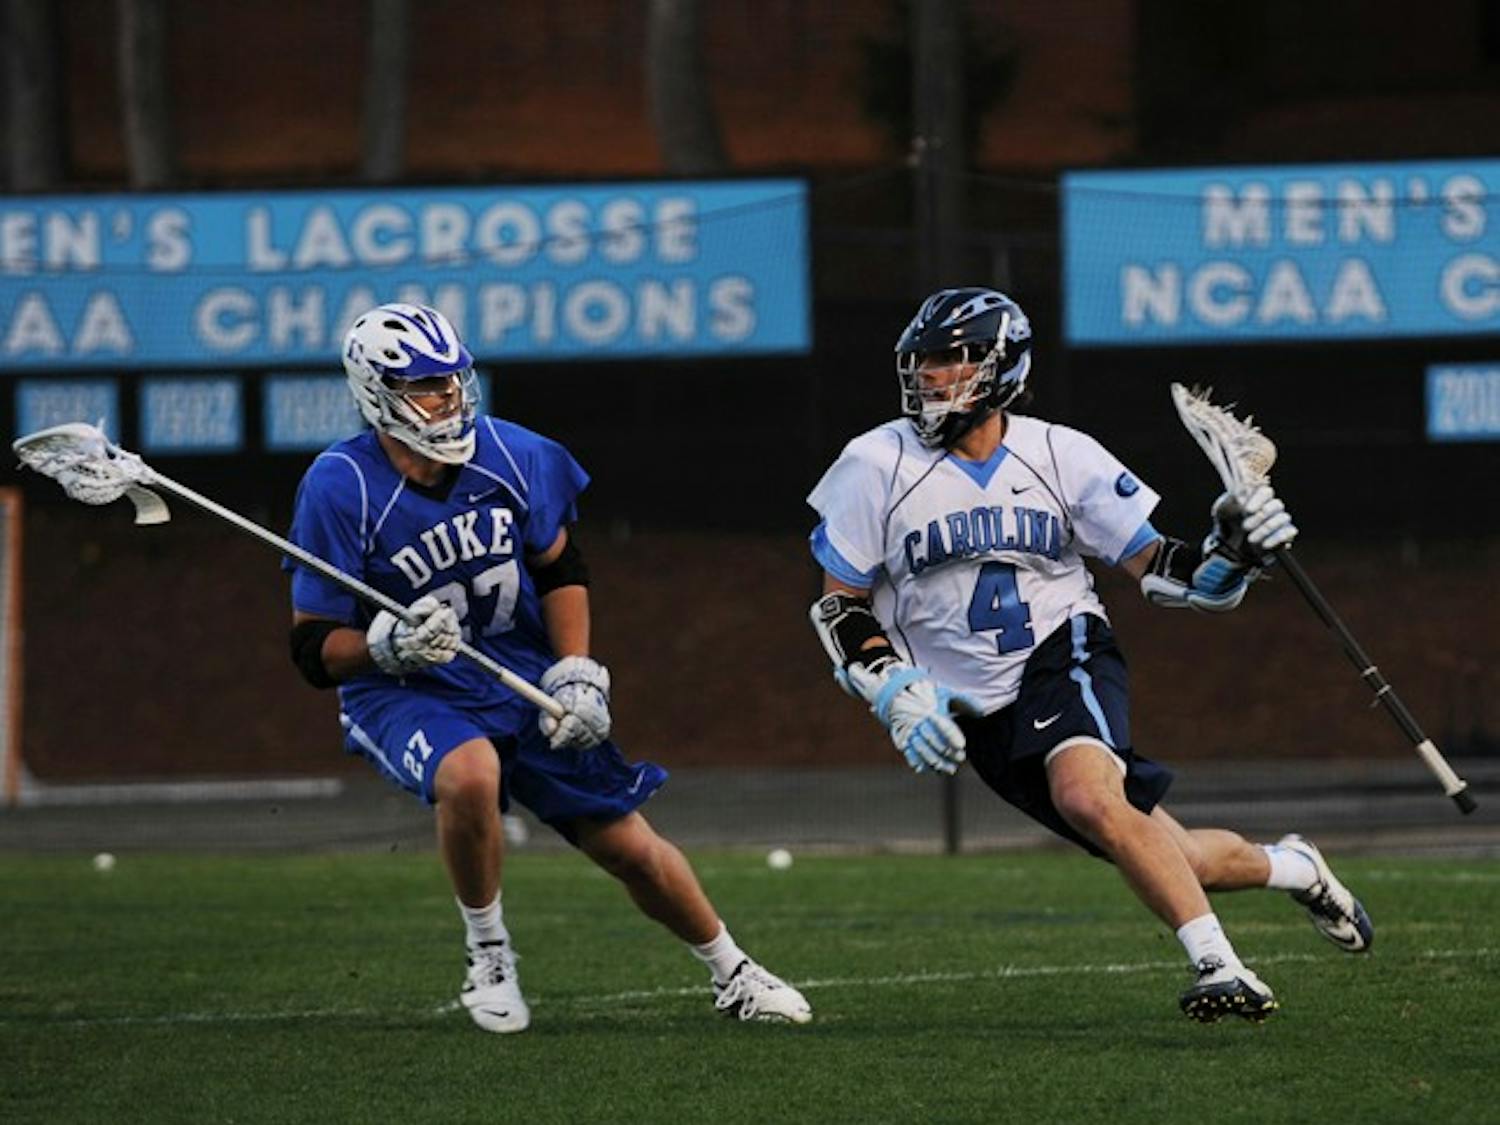 	Senior Billy Bitter scored three goals on 10 shots against the Blue Devils, but it wasn’t enough as the Tar Heels fell to Duke 14-9 at home.